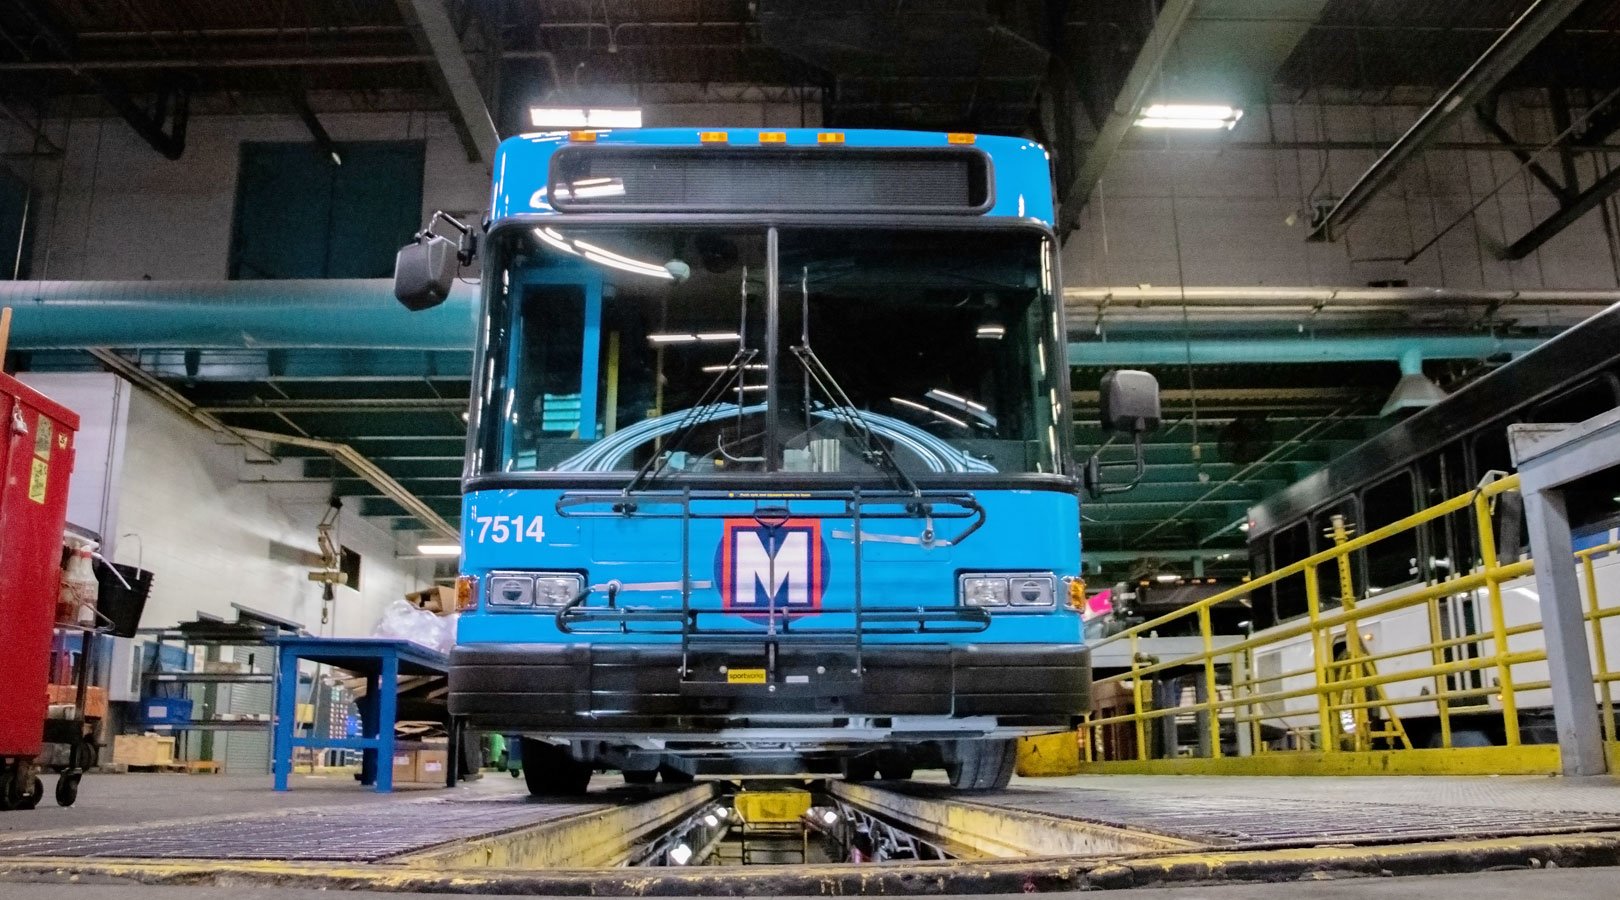 Front view of a Blue MetroBus parked in a service bay inside a Metro maintenance garage